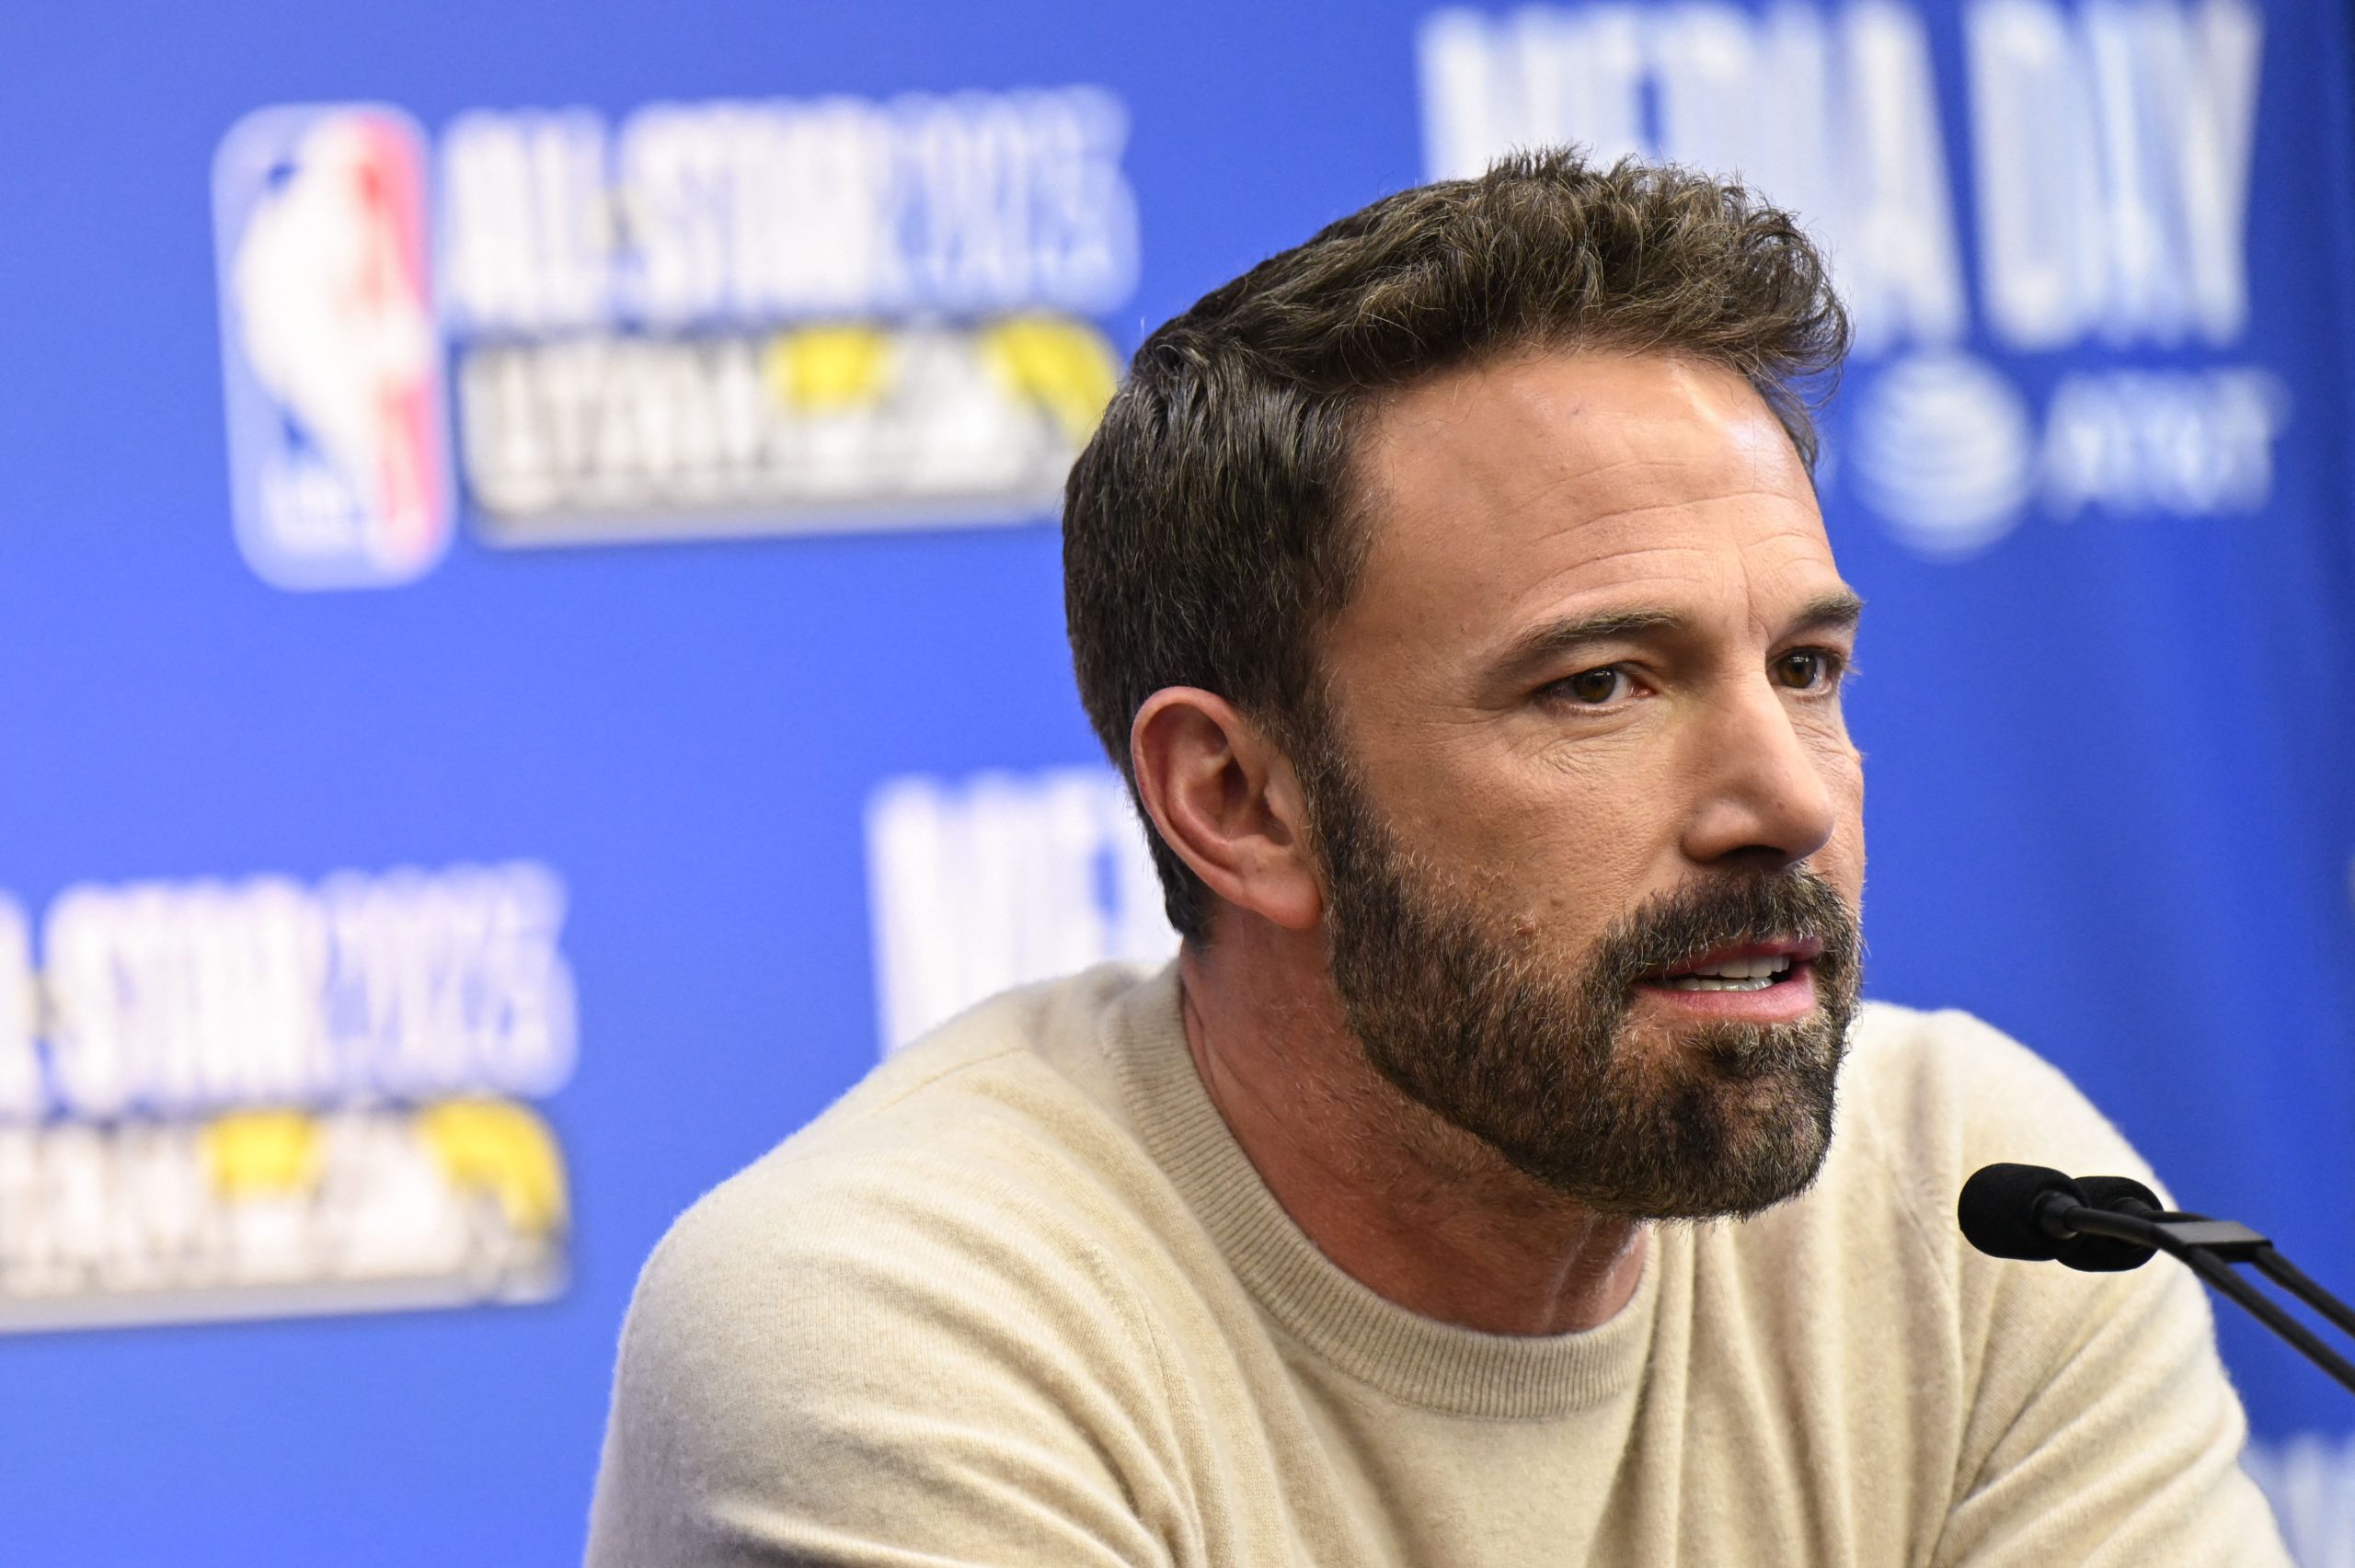 Why did Ben Affleck (who met with Michael Jordan at The Grove XXIII) say that ‘golf is like meth?’